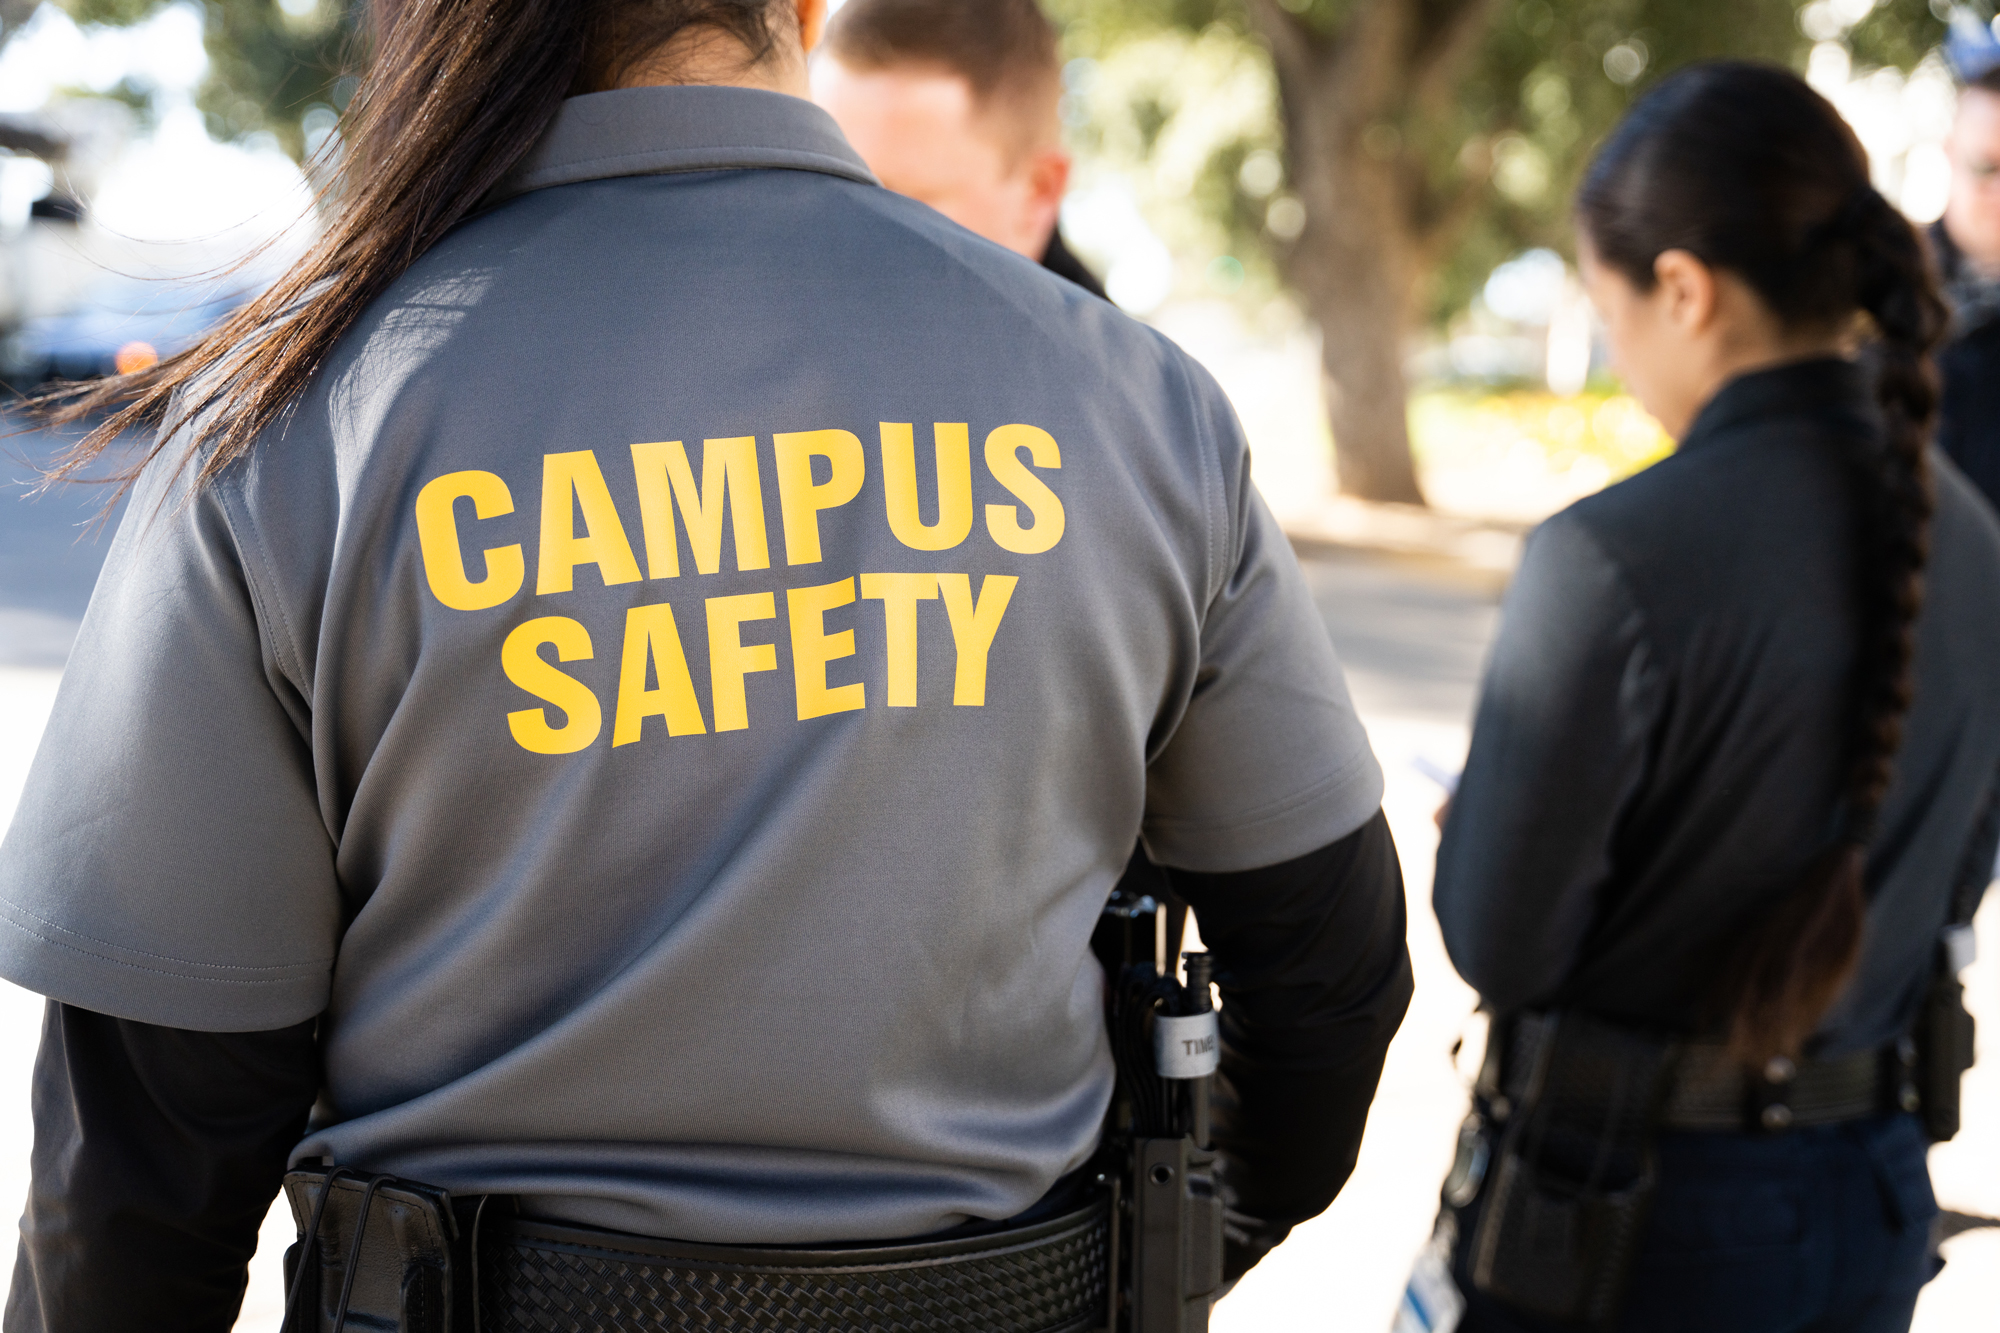 Campus Safety Specialist with her back to the camera, showing the back of the uniform shirt, labeled "Campus Safety"